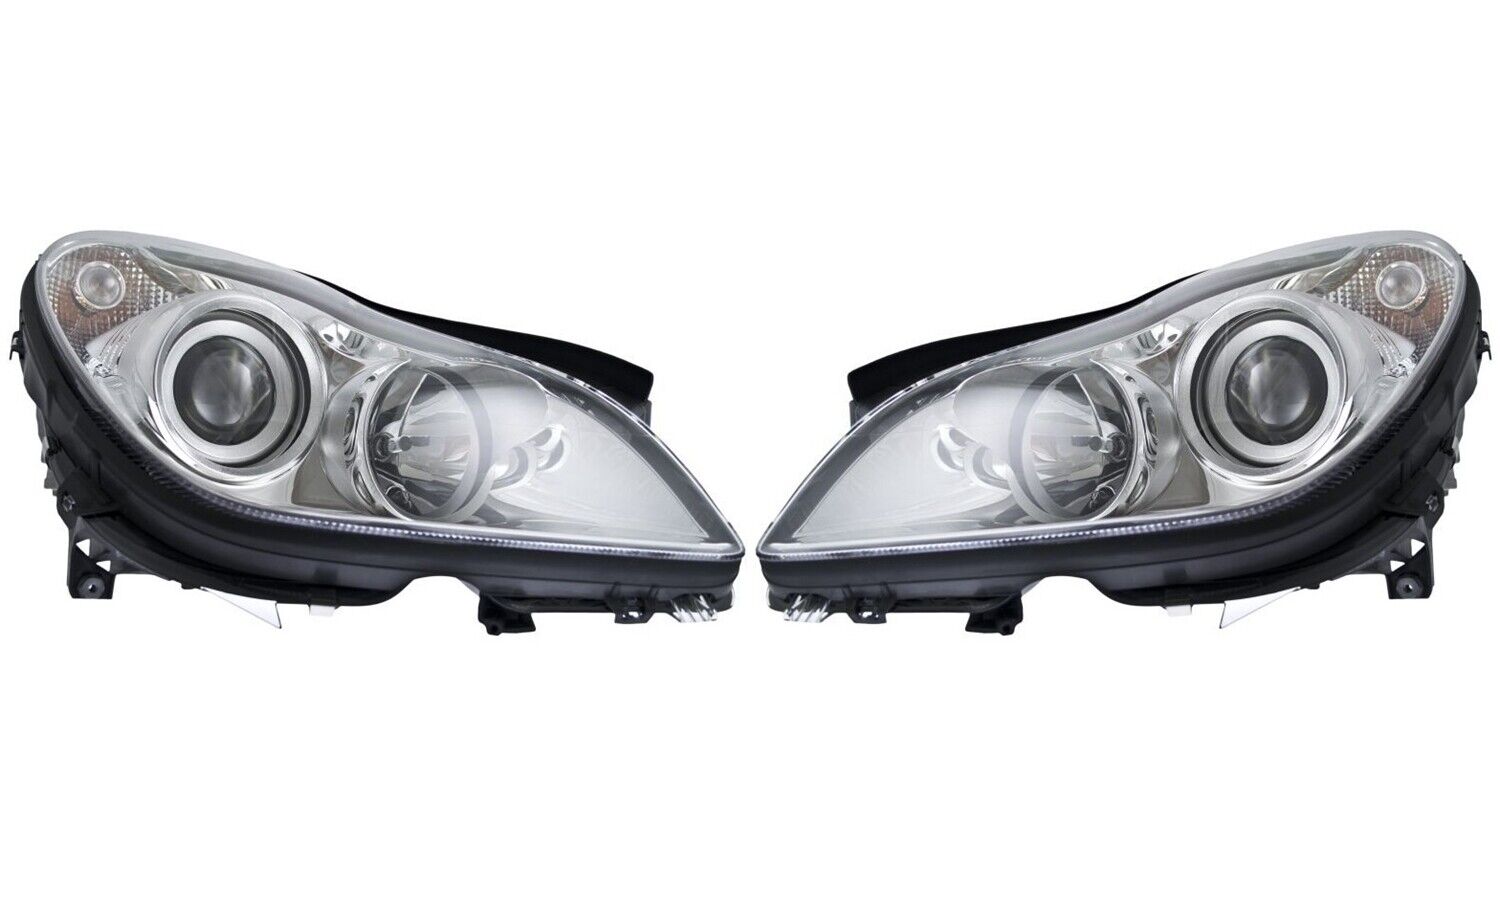 Pair Set of 2 Front Halogen Headlights Lamps Assies Hella For Benz W219 CLS550